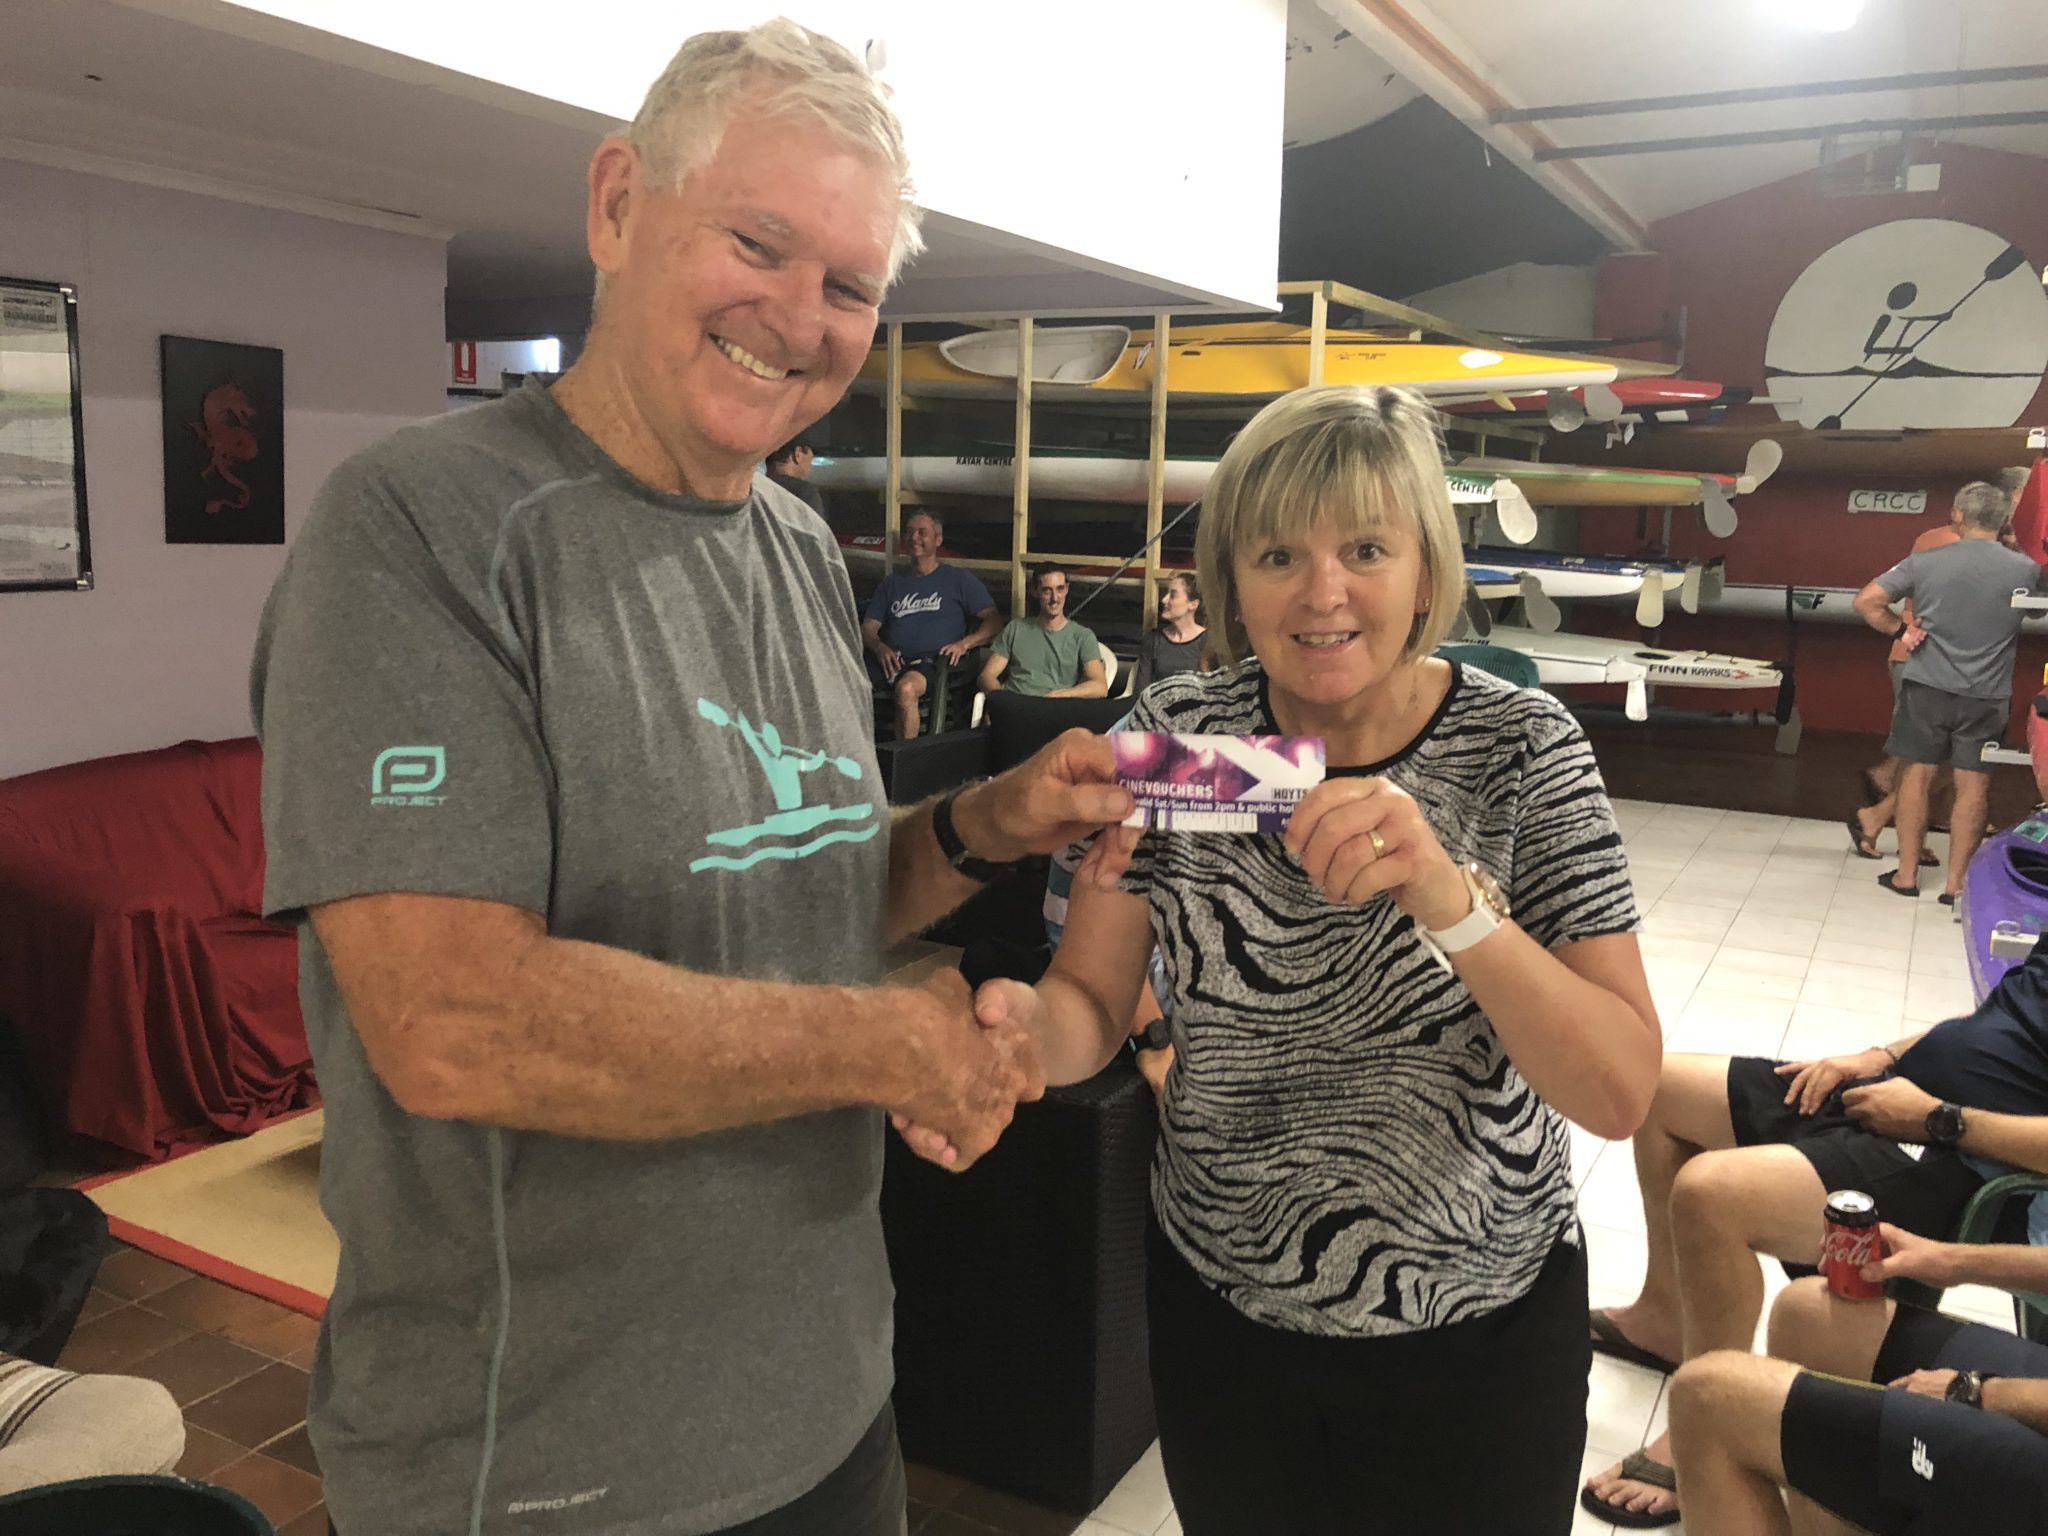 Tuesday 19th March 2019 : Tonight’s photo shows club member Judith Thompson presenting Jerry Alderson with the winners movie voucher.